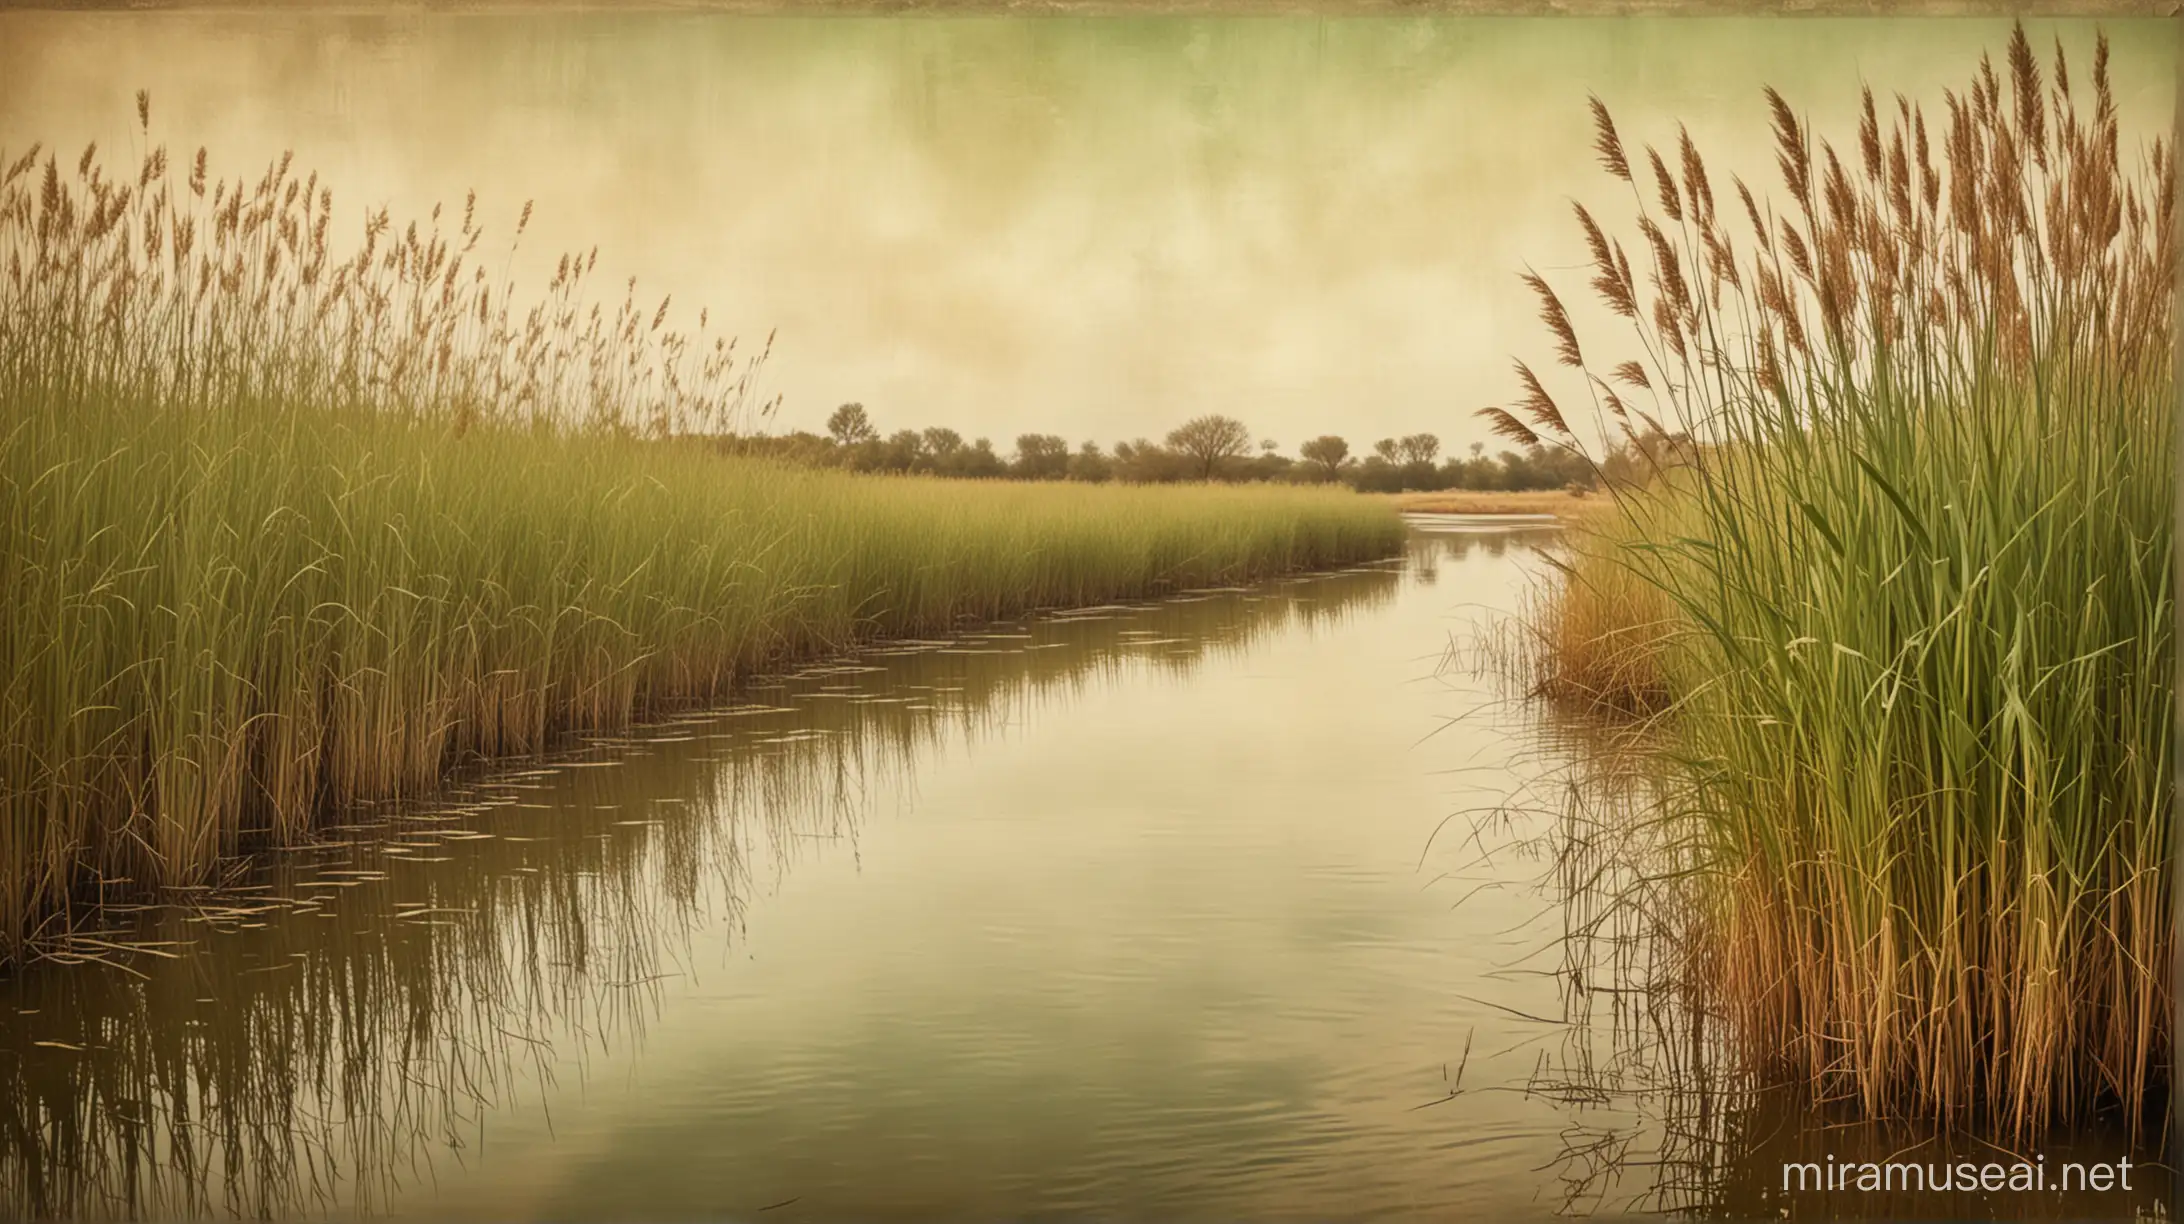 Vintage River Scene with Reeds and Parchment